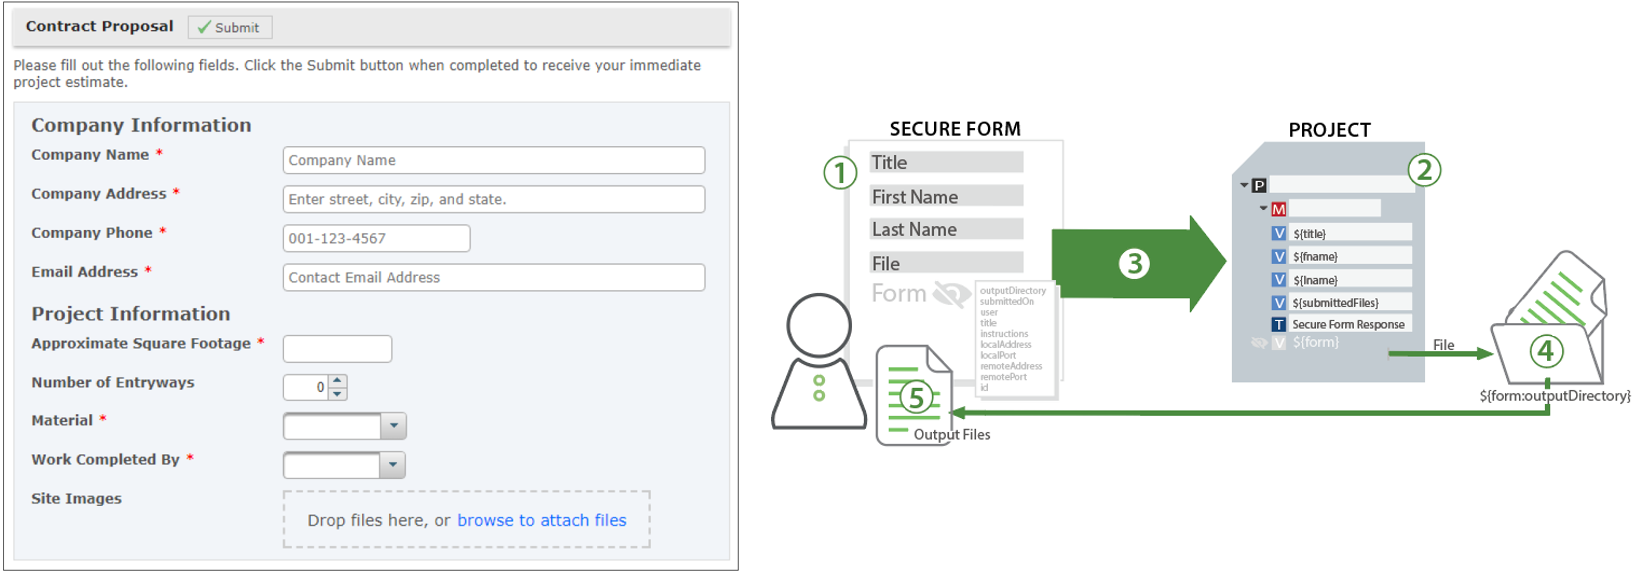 Secure Mail con Secure Form